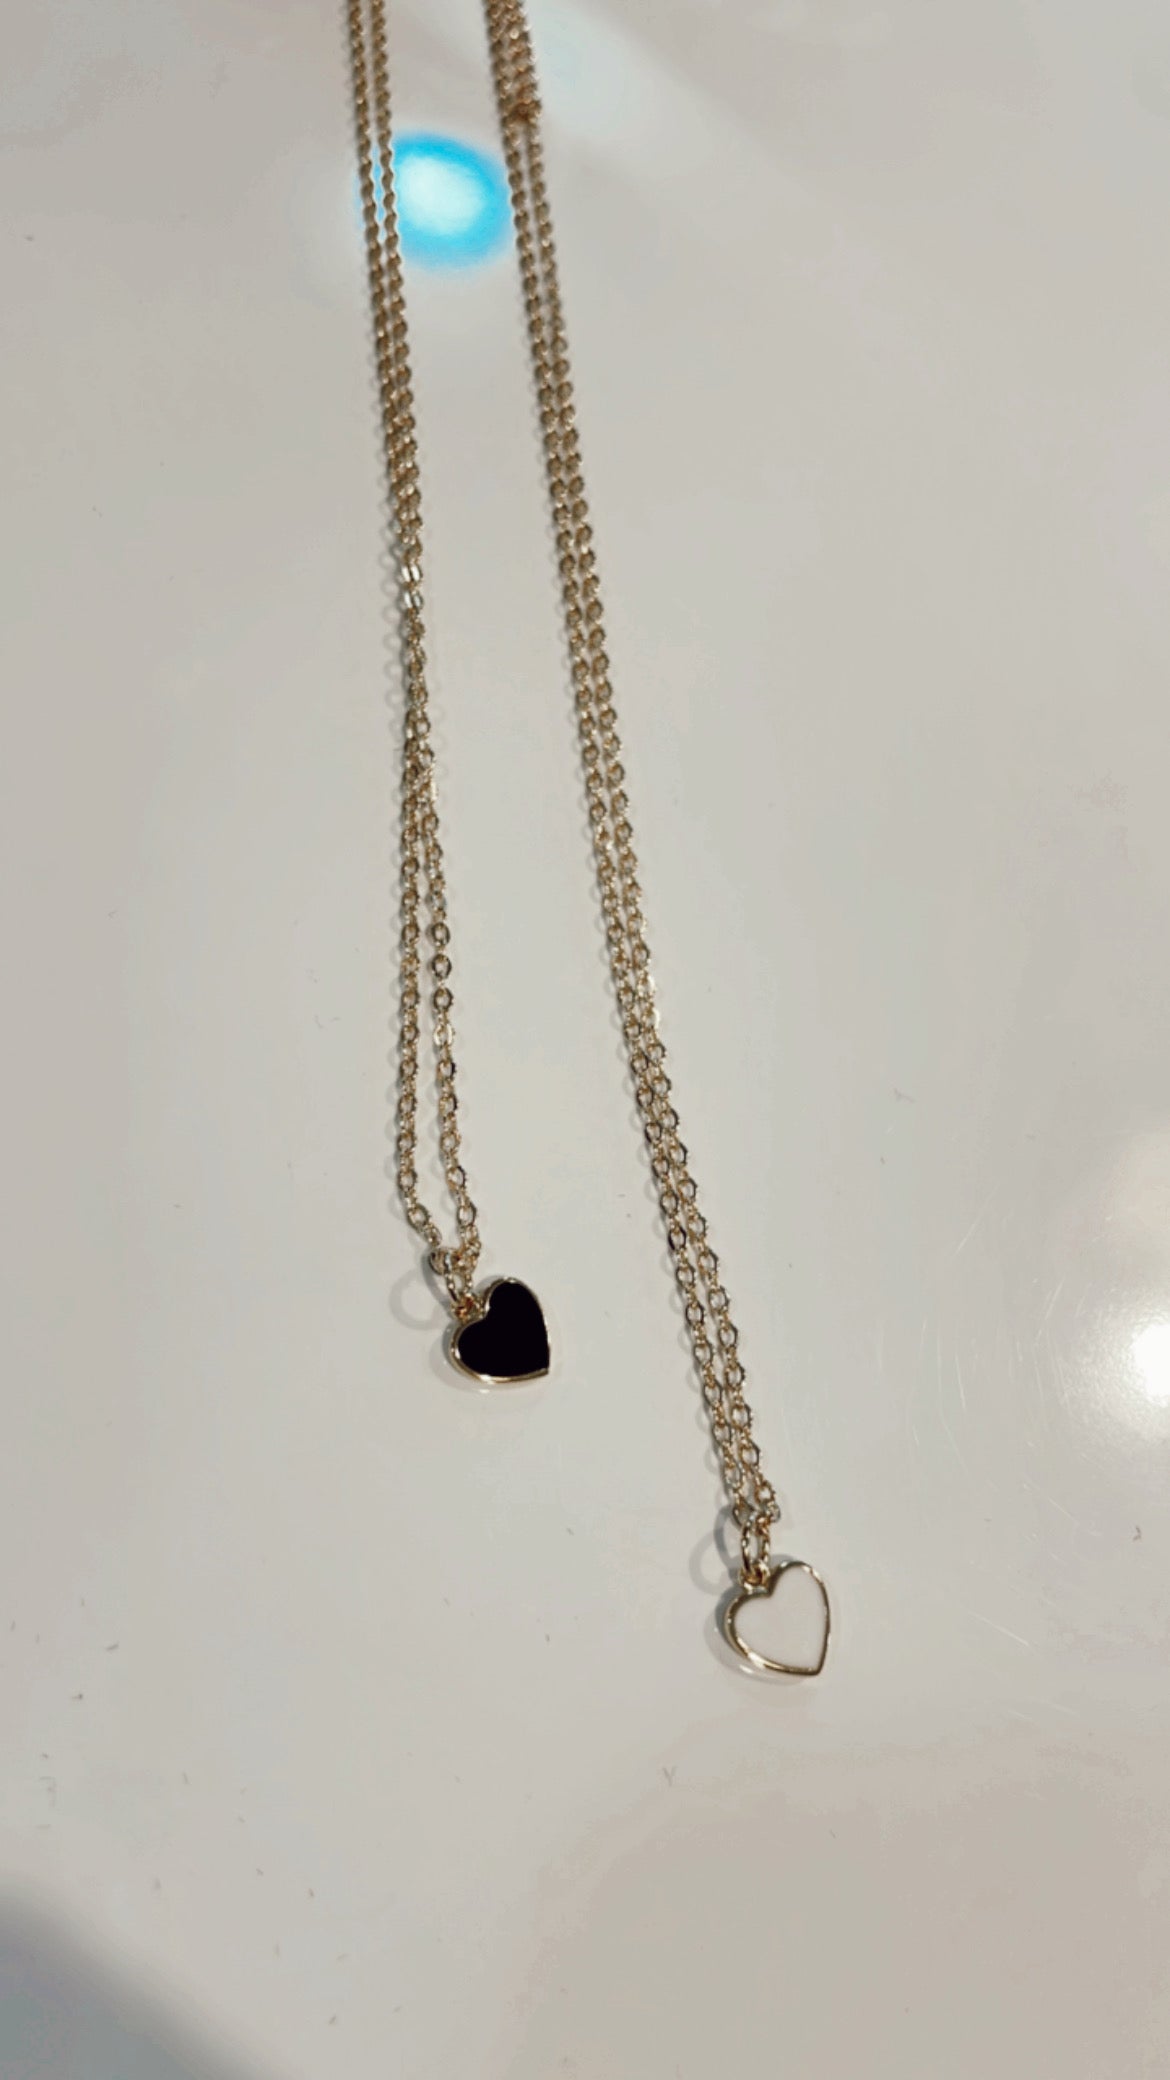 DBL small heart necklace